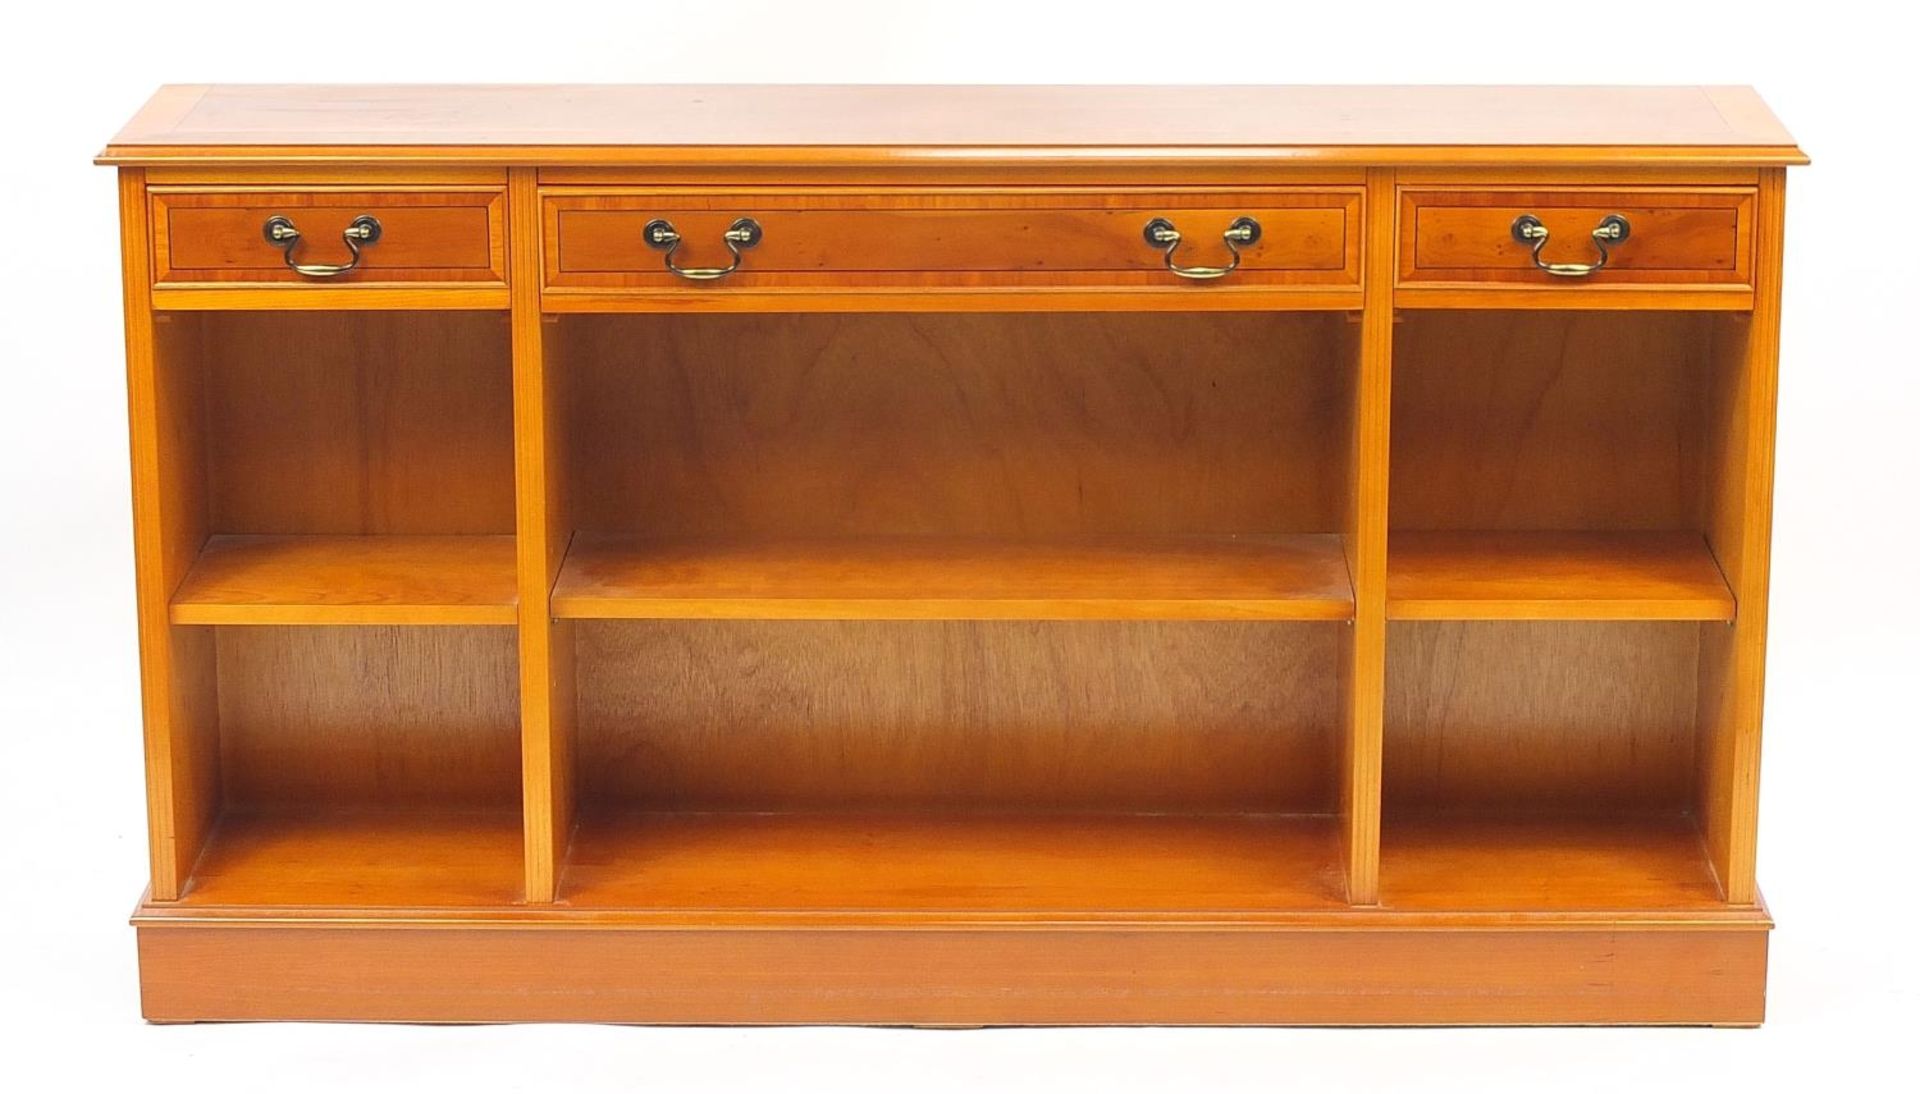 Inlaid yew open bookcase fitted with three drawers above three adjustable shelves, 84.5cm H x - Image 2 of 4